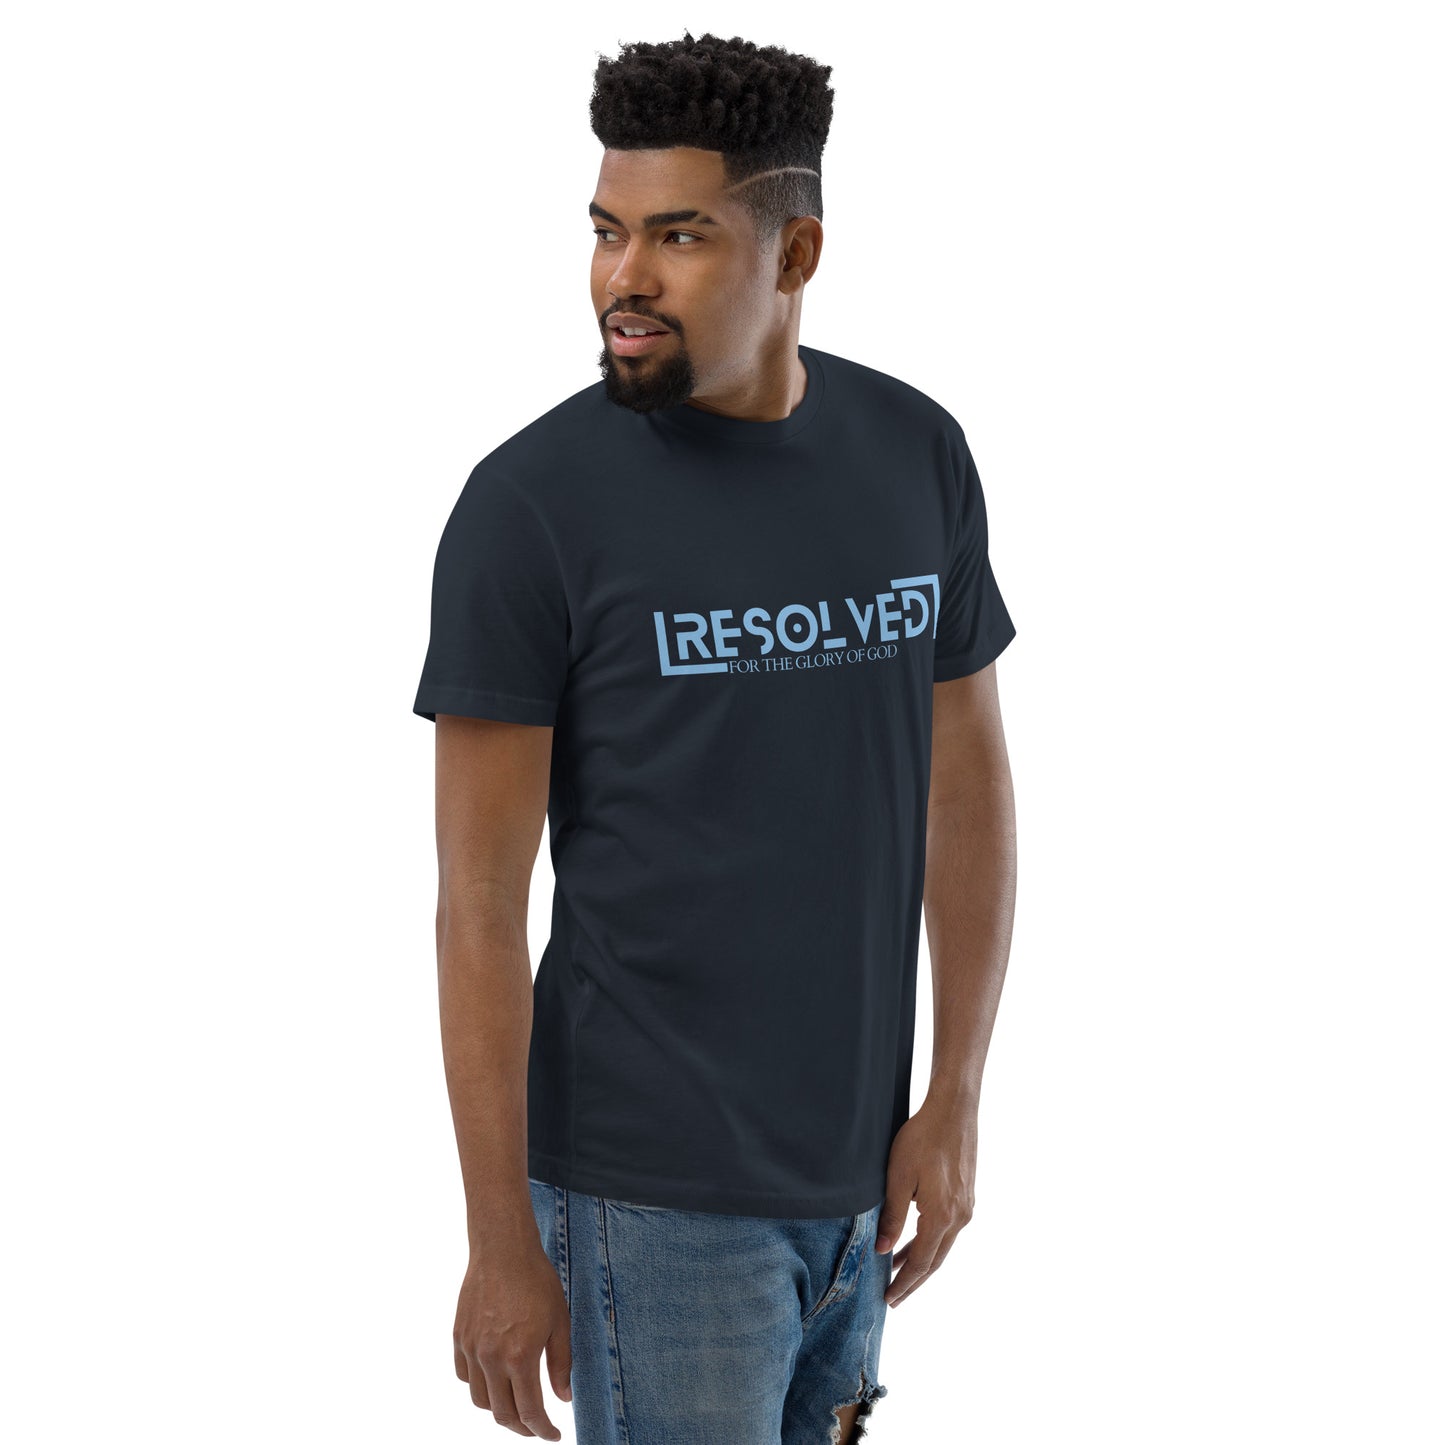 Resolved for the Glory of God T-Shirt